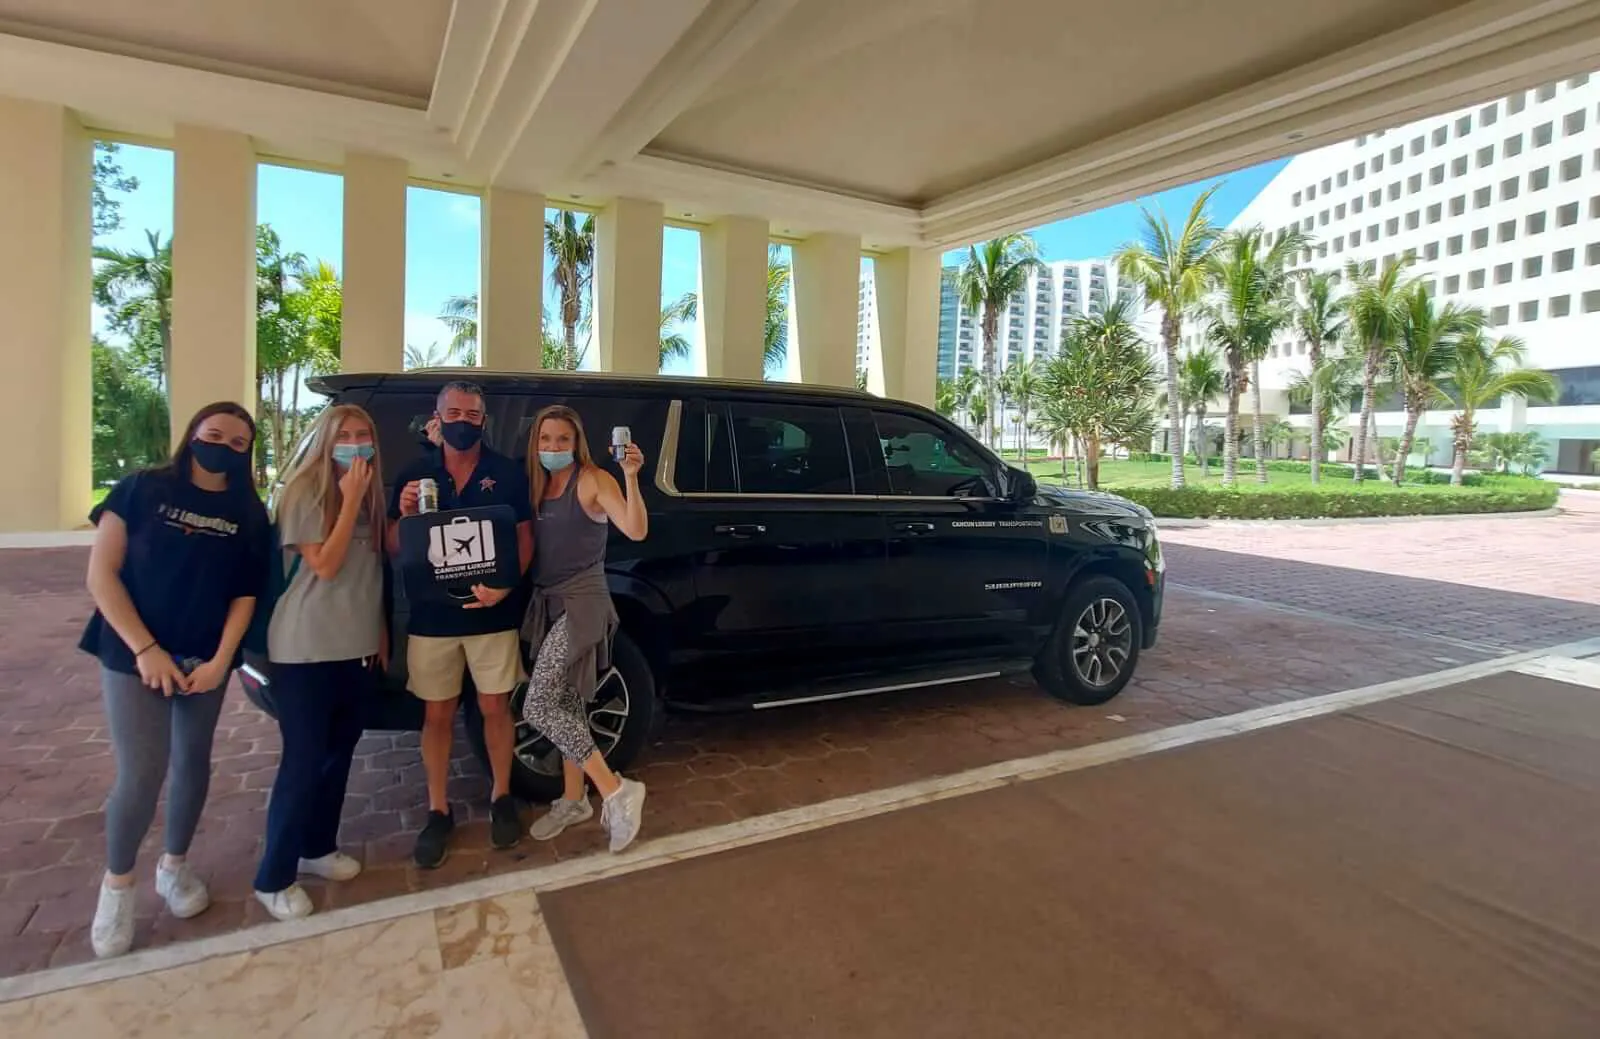 Cancun Luxury Transportation Service from Cancun Airport to your resort in the Riviera Maya picking a party of four at their resort.